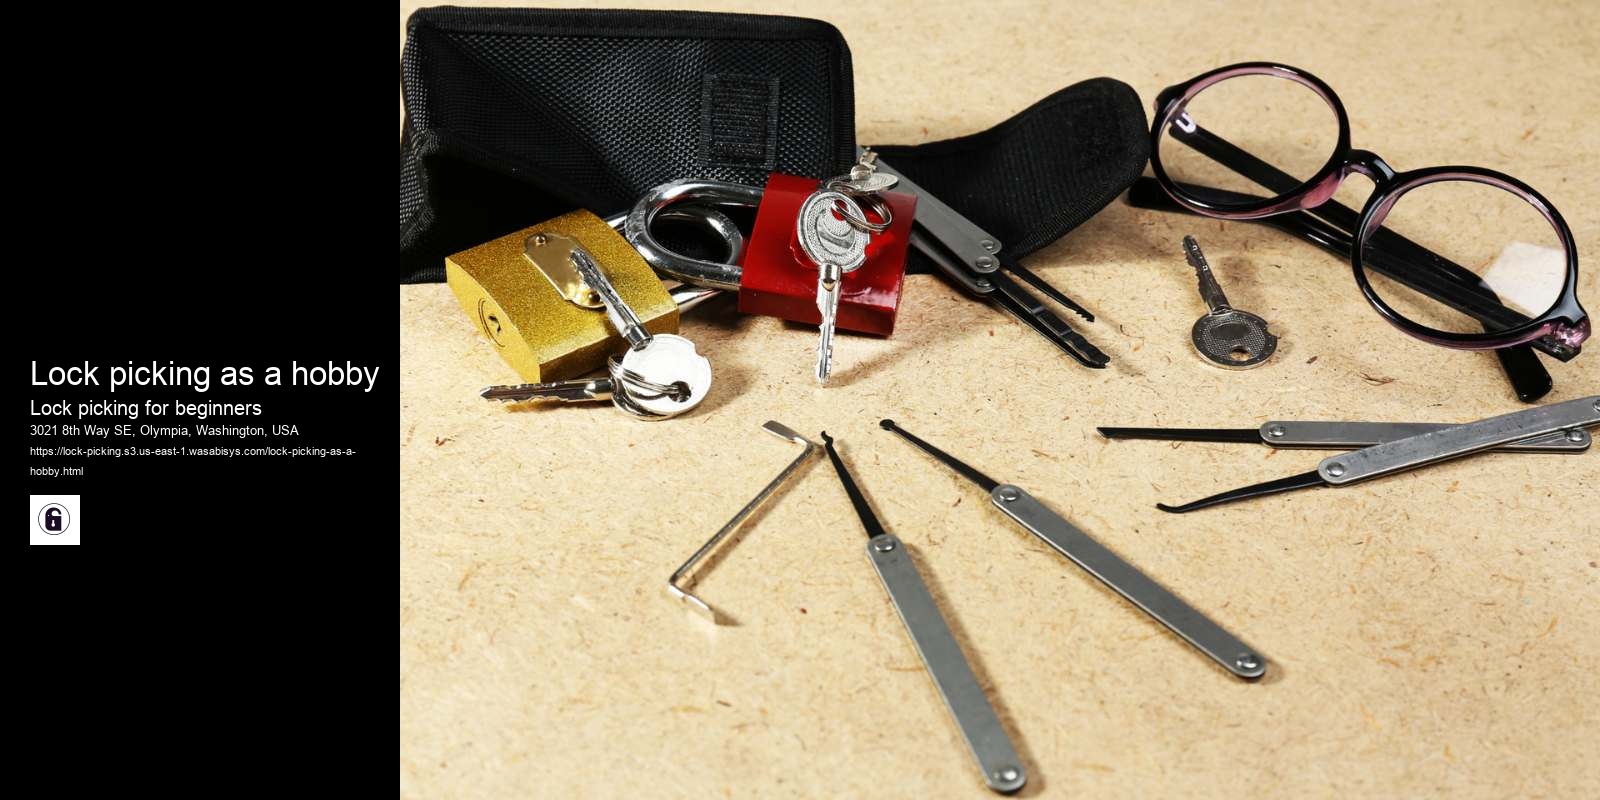 Lock picking as a hobby